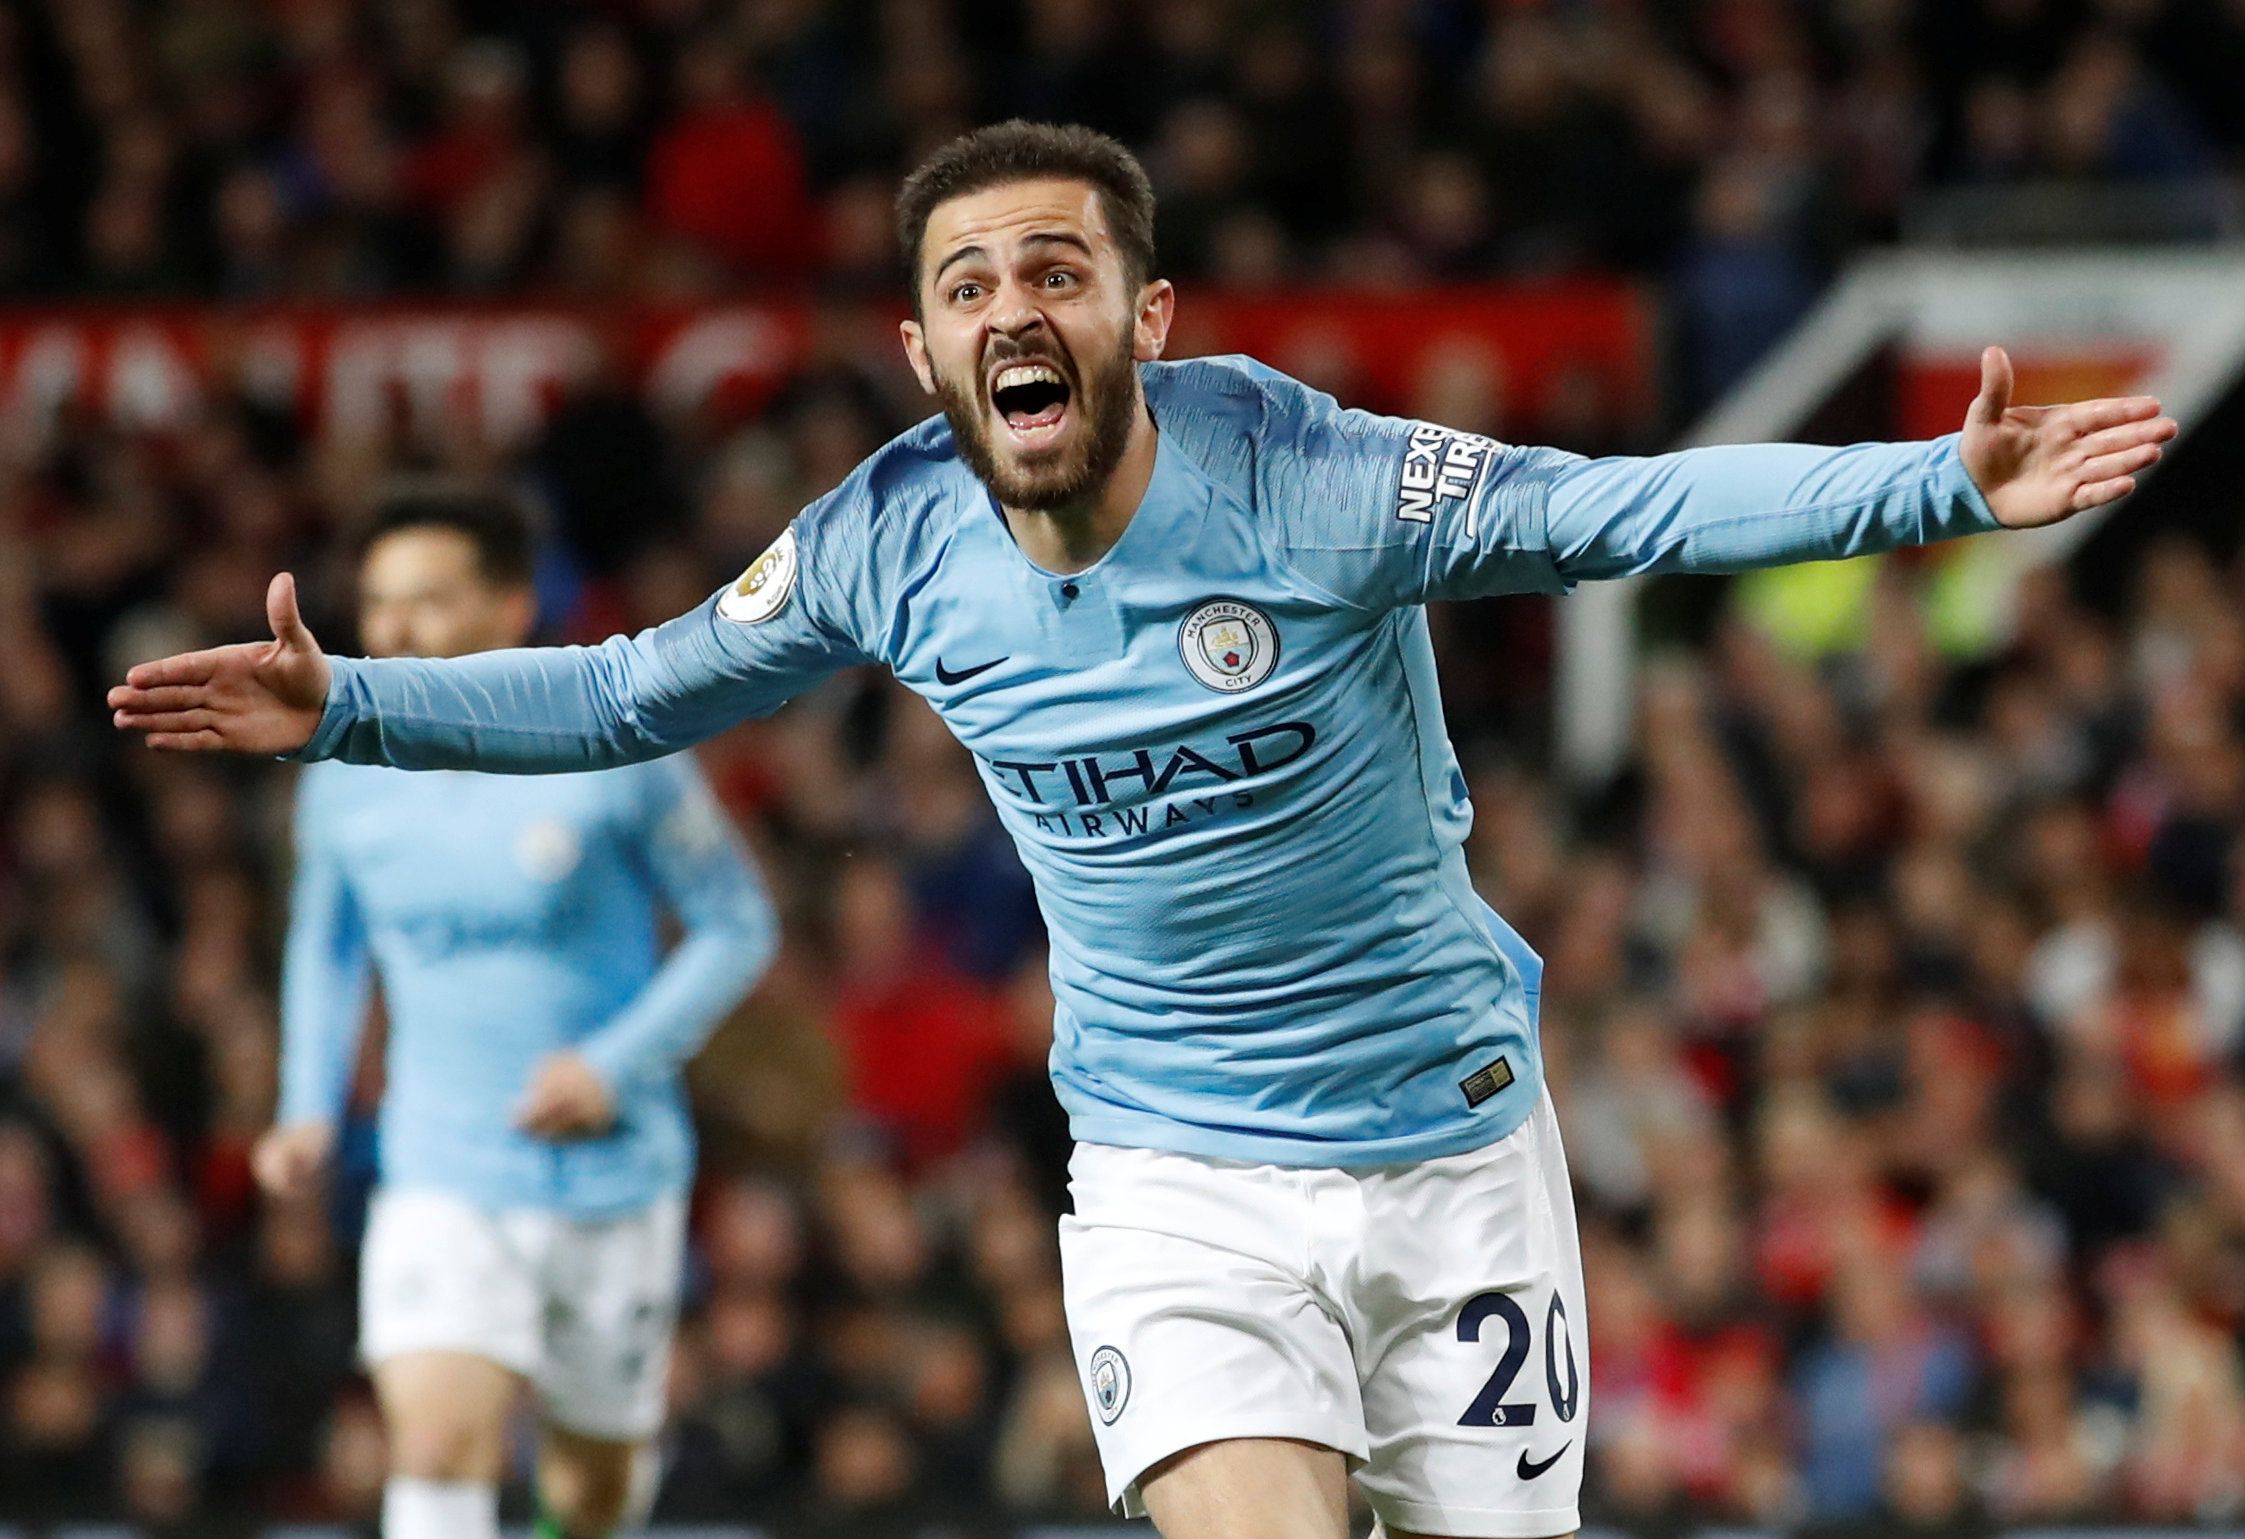 Soccer Football - Premier League - Manchester United v Manchester City - Old Trafford, Manchester, Britain - April 24, 2019  Manchester City's Bernardo Silva celebrates scoring their first goal            Action Images via Reuters/Carl Recine  EDITORIAL USE ONLY. No use with unauthorized audio, video, data, fixture lists, club/league logos or 